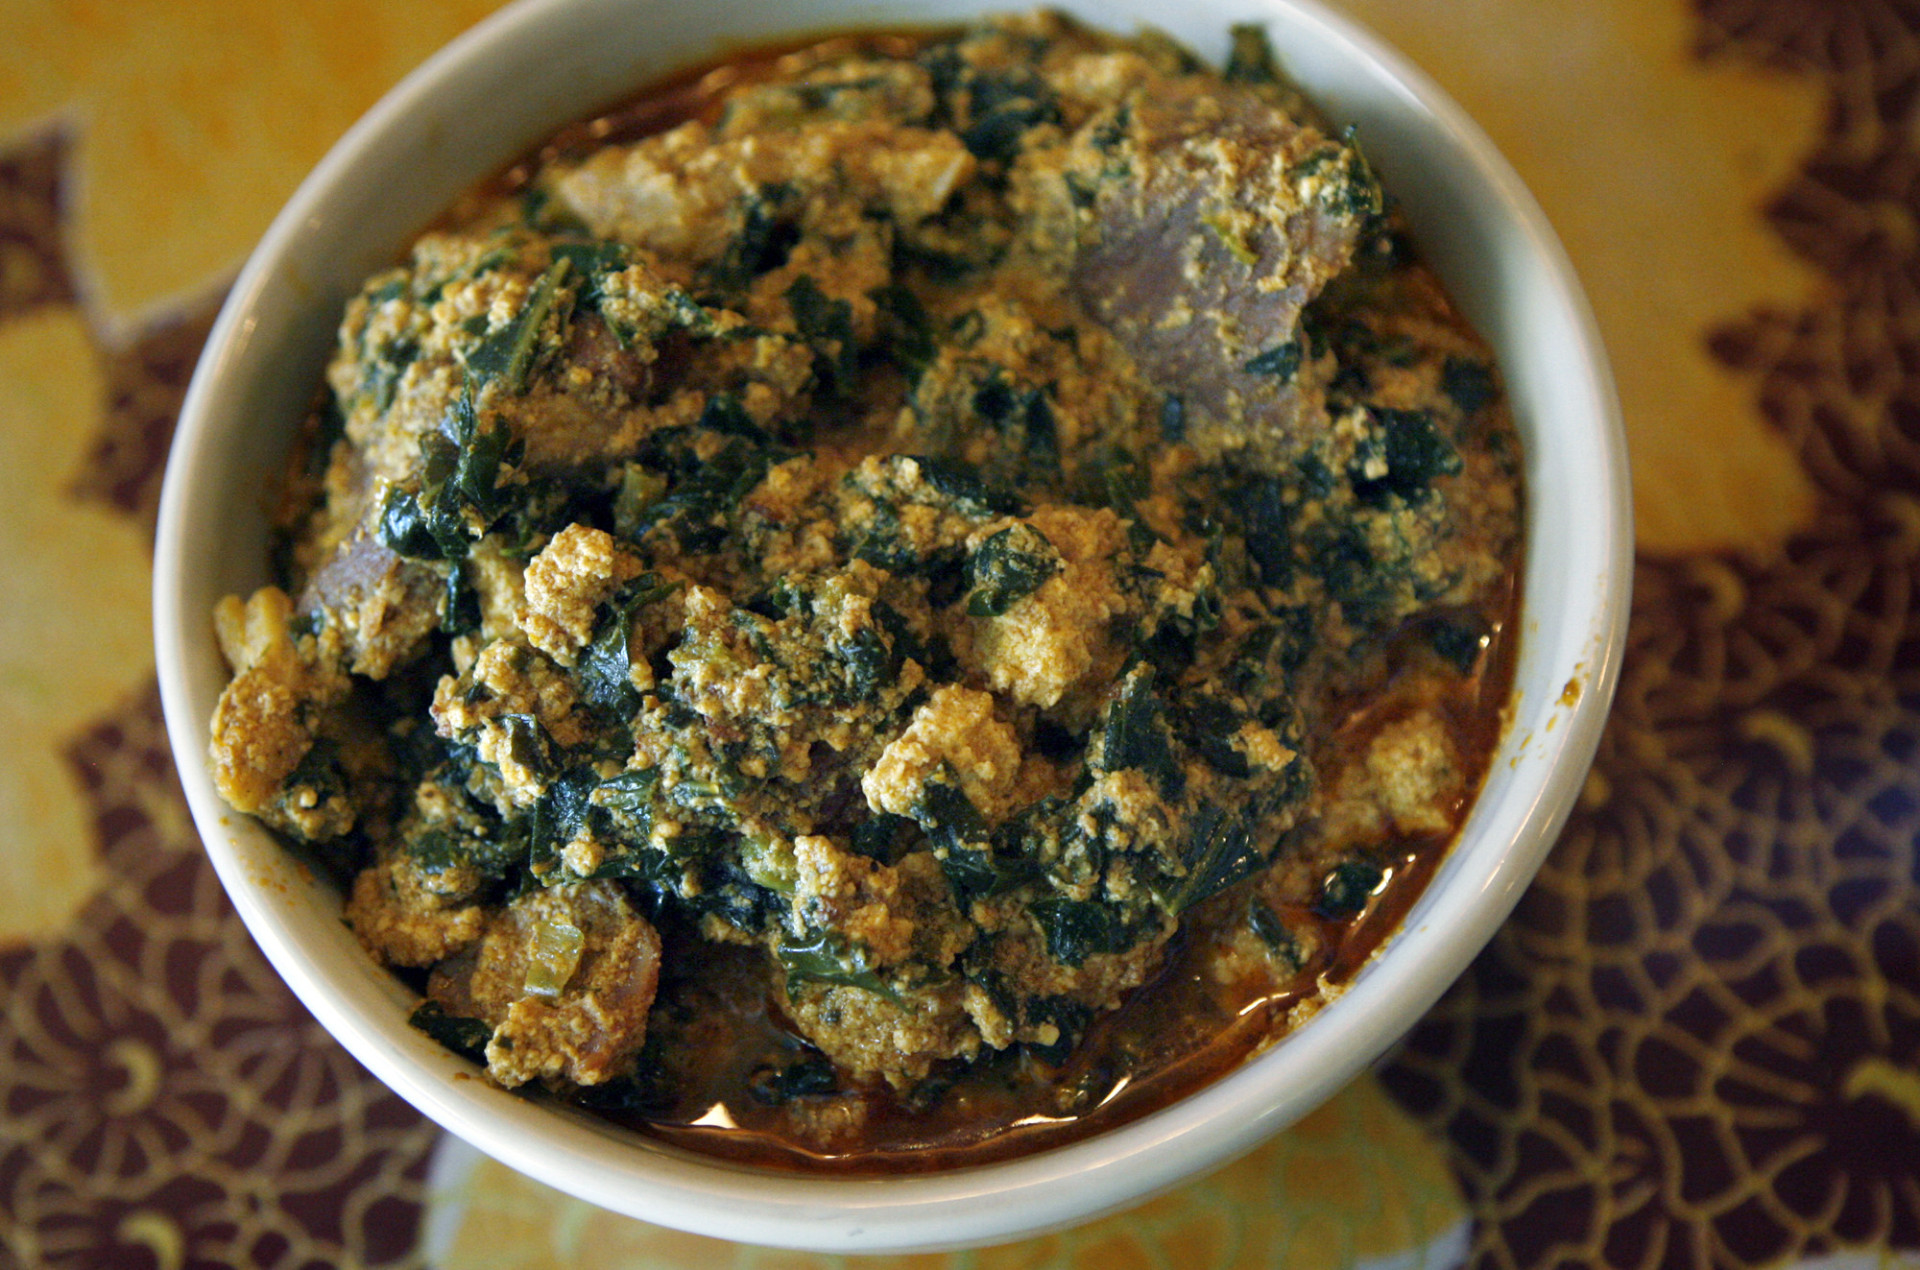 <p><span>Egusi soup is a one-pot soup that combines blended melon seed, pepper, leafy vegetables, and meat, creating a nutty, spicy, and tasty dish. The most popular way to serve the soup is to pair it with pounded yam.</span></p><p>You may also like:<a href="https://www.starsinsider.com/n/463926?utm_source=msn.com&utm_medium=display&utm_campaign=referral_description&utm_content=707039en-us"> Bald celebrities when they had hair</a></p>